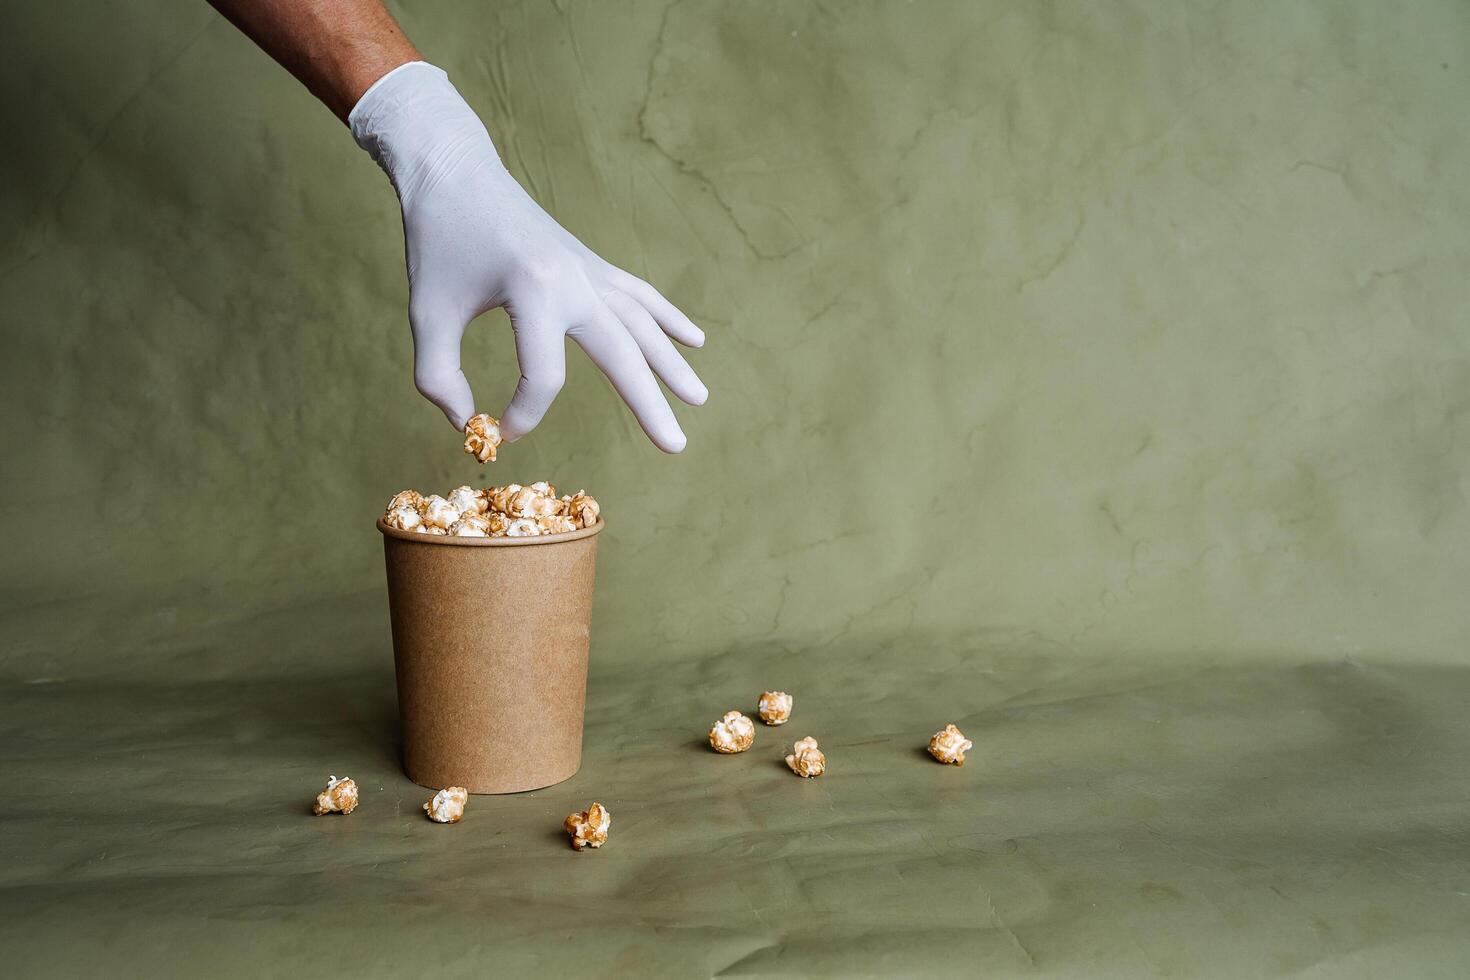 hand in a white glove reaches for popcorn, take food in protective gloves, hold a piece of food with two fingers, a full box of popcorn, security at the fast food distribution, minimal concept photo